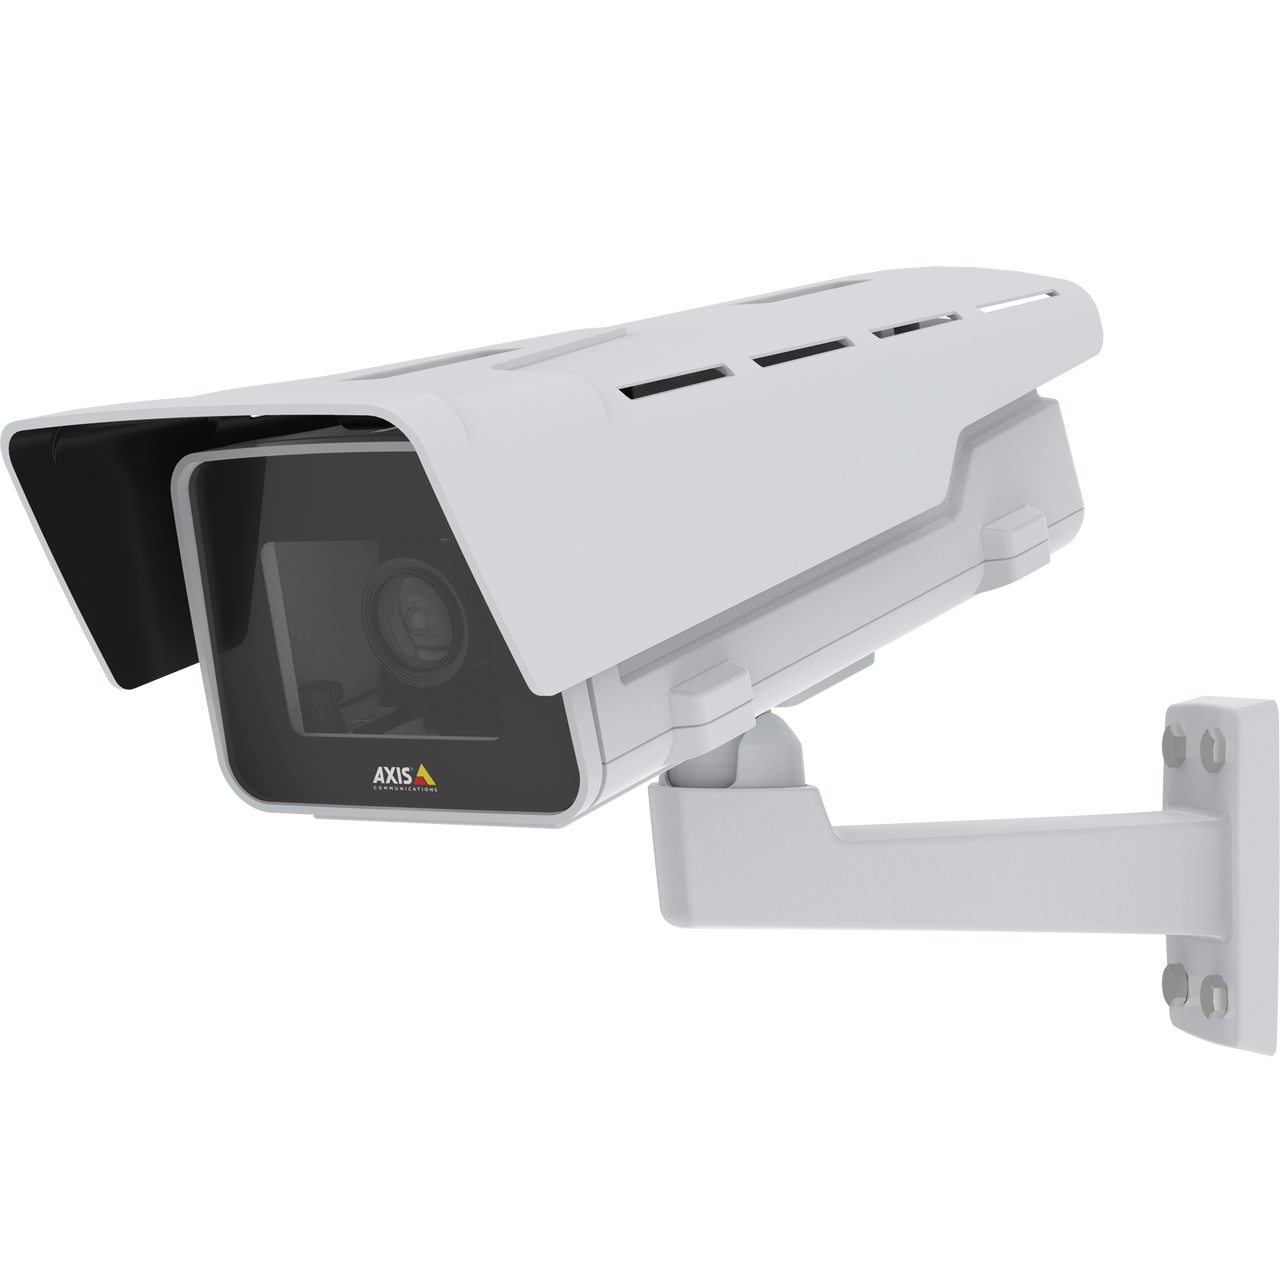 AXIS P1375-E BAREBONE Stable, 2 MP surveillance for the great outdoors